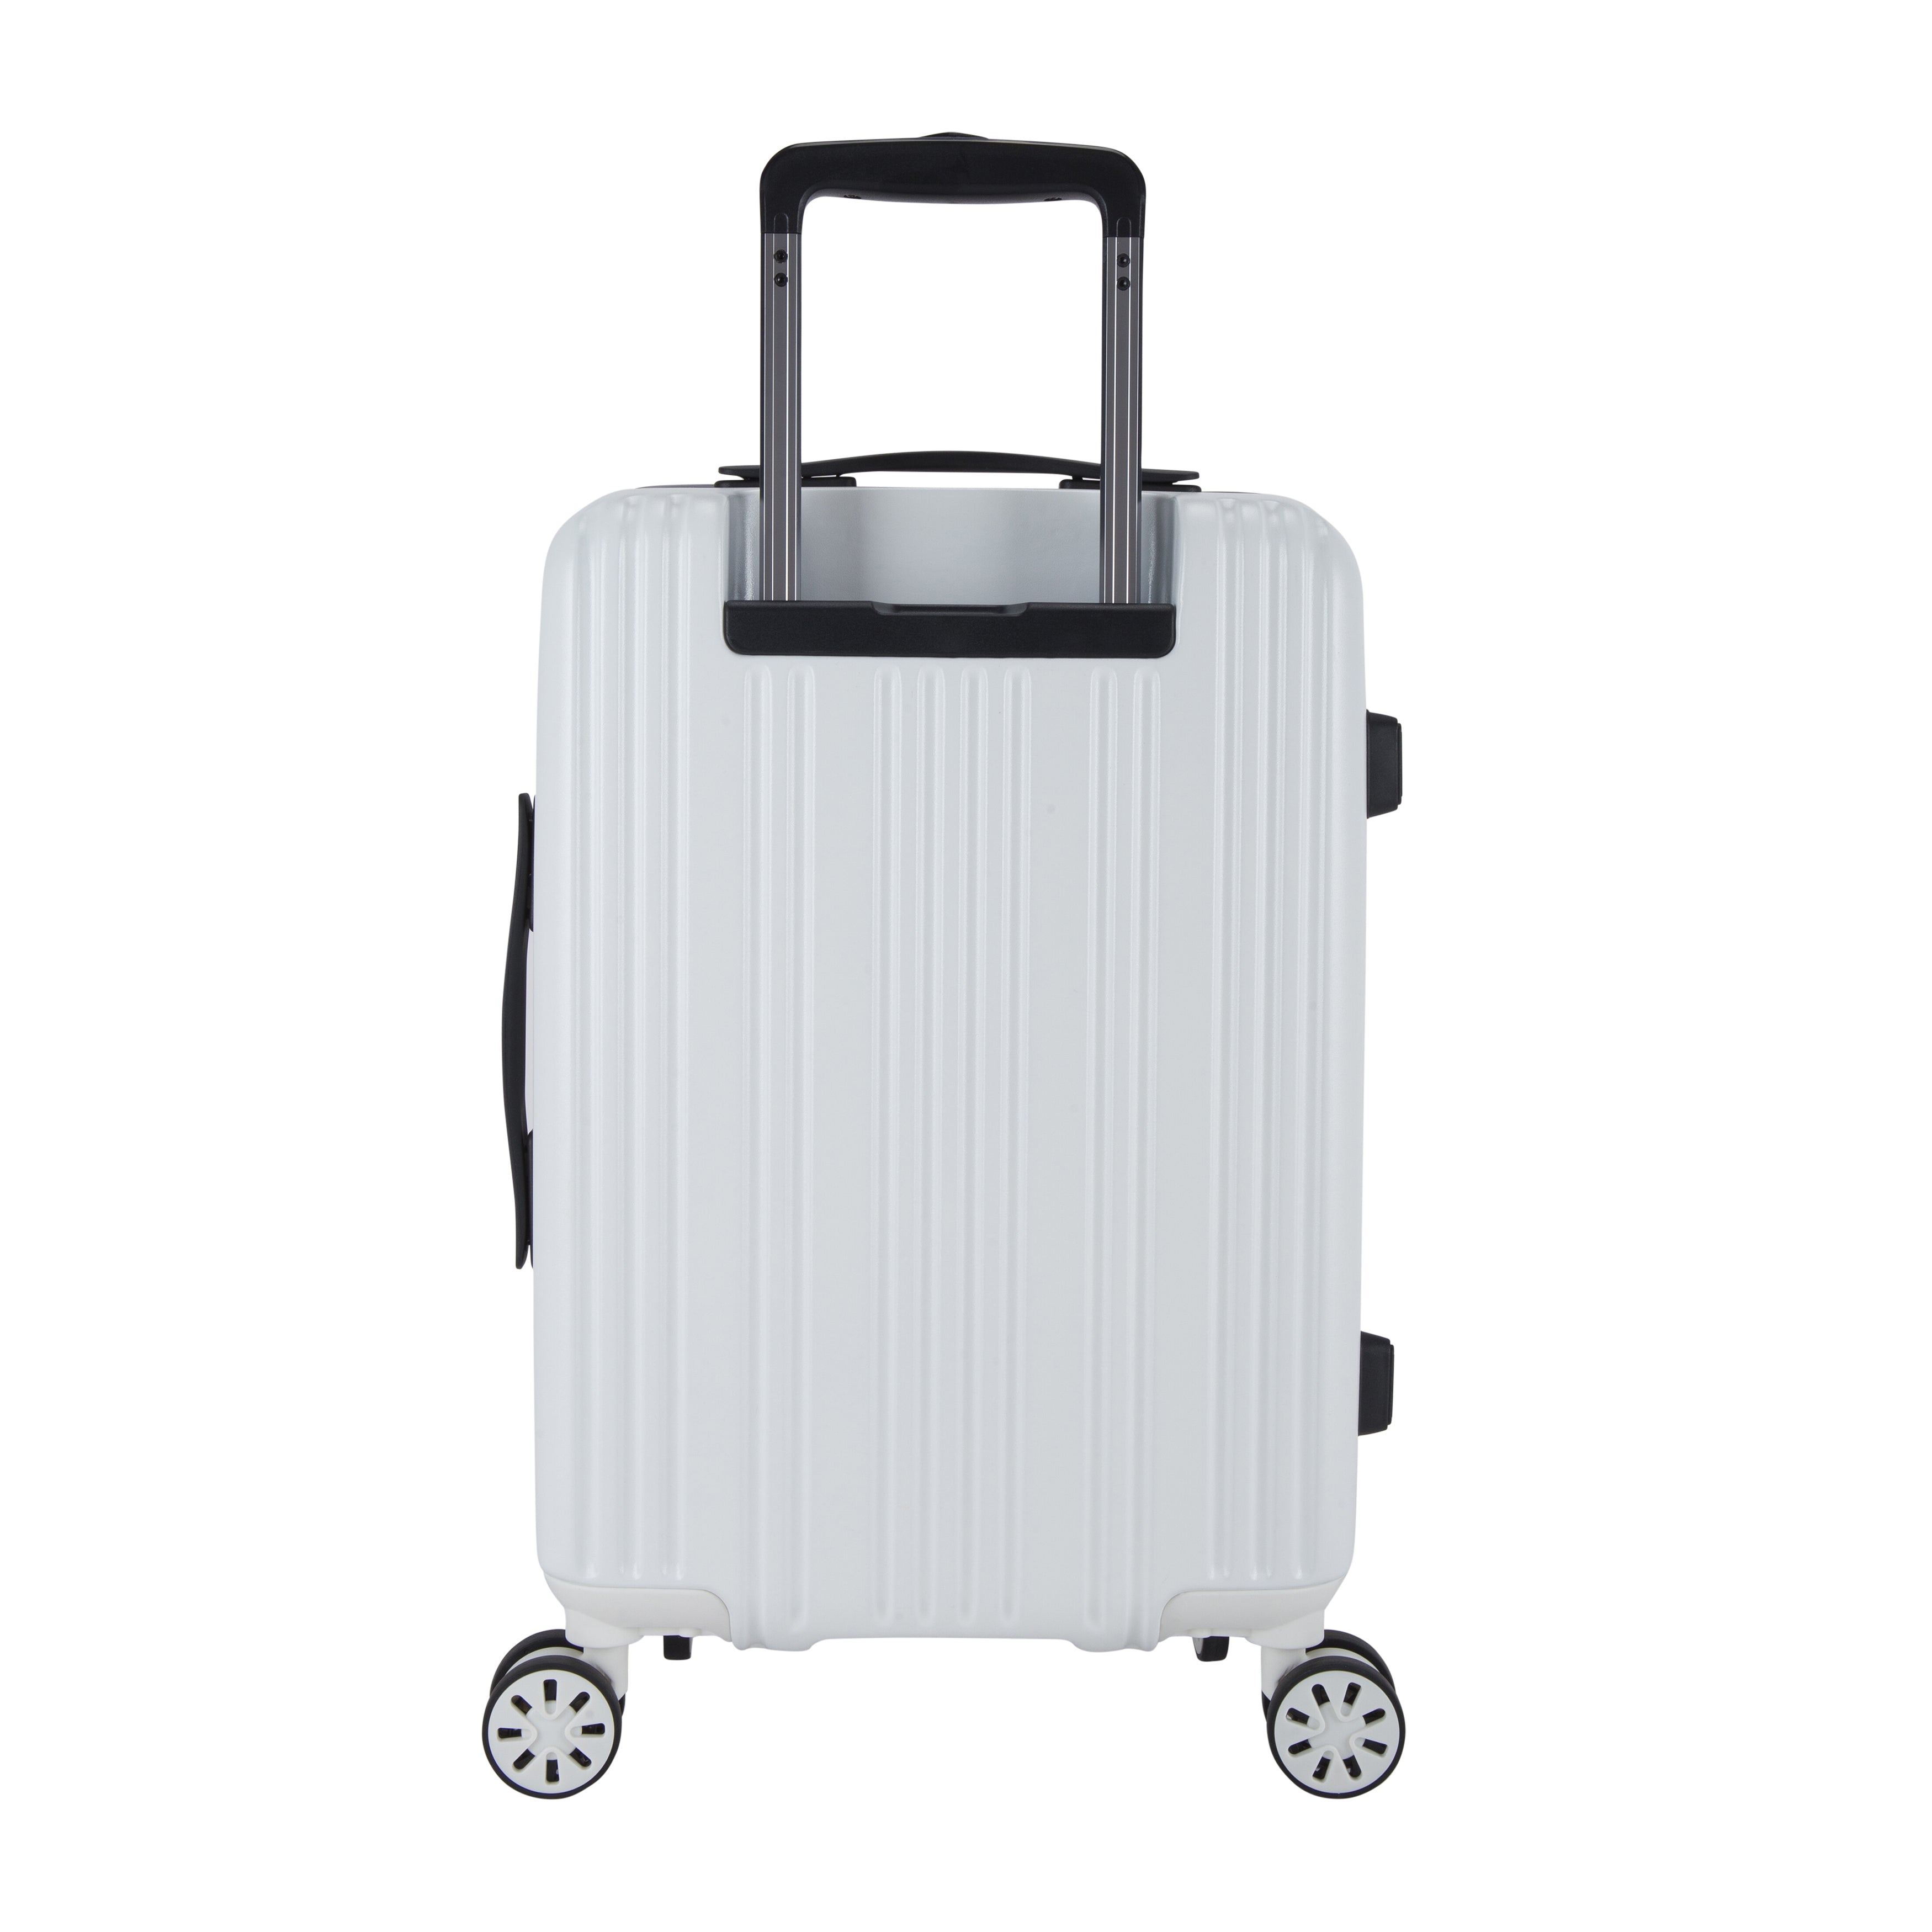 Pierre Cardin Suitcase Front Pocket Design Carry On, White